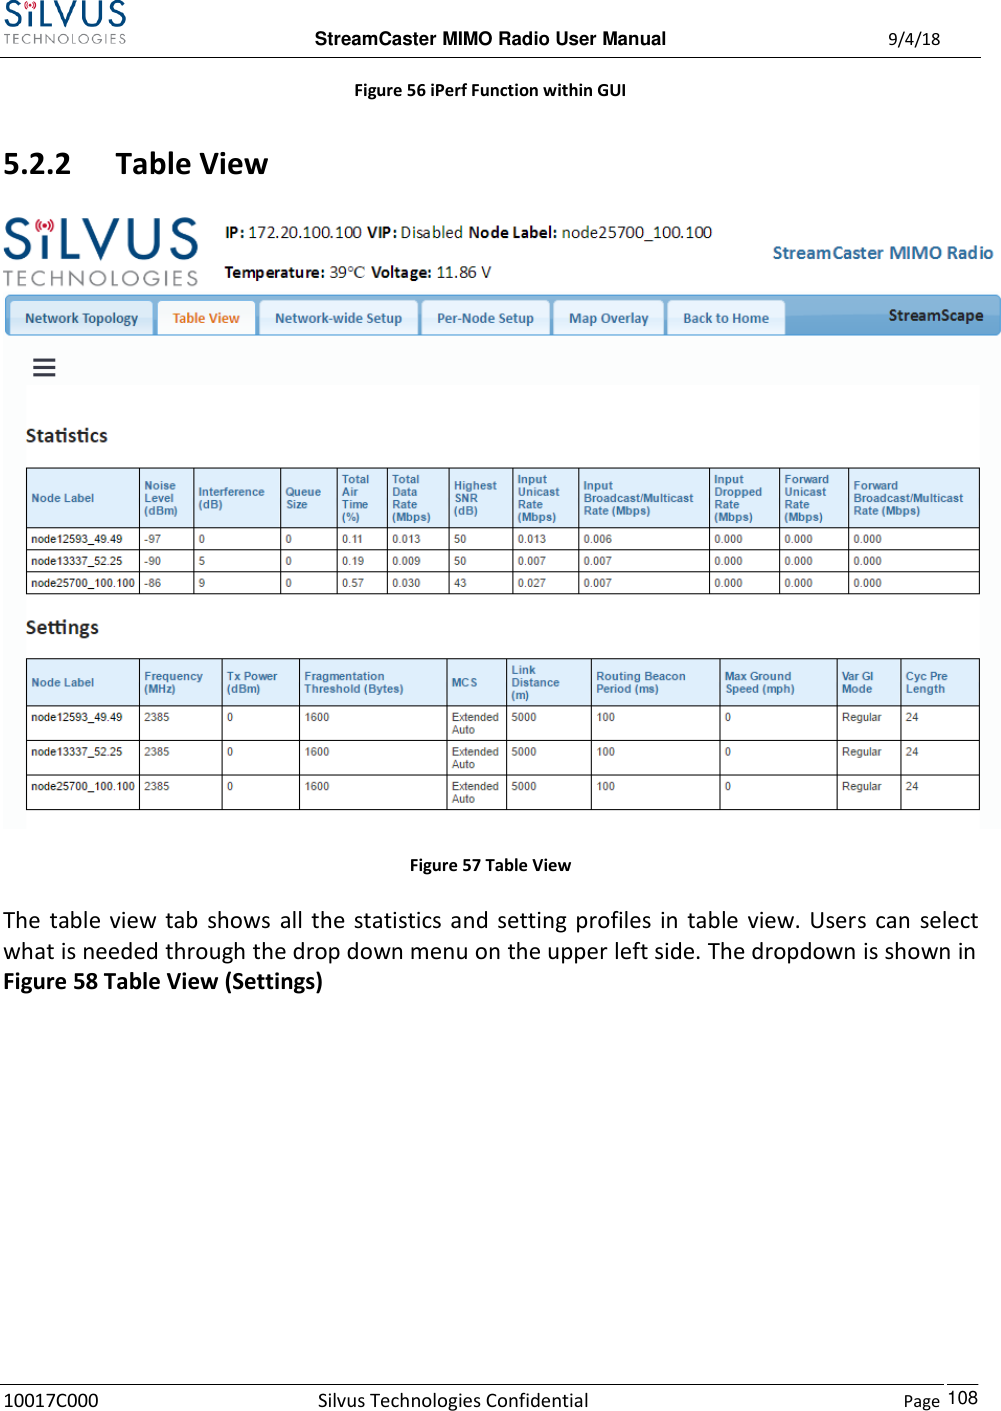  StreamCaster MIMO Radio User Manual  9/4/18 10017C000 Silvus Technologies Confidential    Page    108 Figure 56 iPerf Function within GUI  5.2.2 Table View  Figure 57 Table View The  table  view  tab  shows  all the  statistics and  setting  profiles  in table  view. Users  can  select what is needed through the drop down menu on the upper left side. The dropdown is shown in Figure 58 Table View (Settings) 